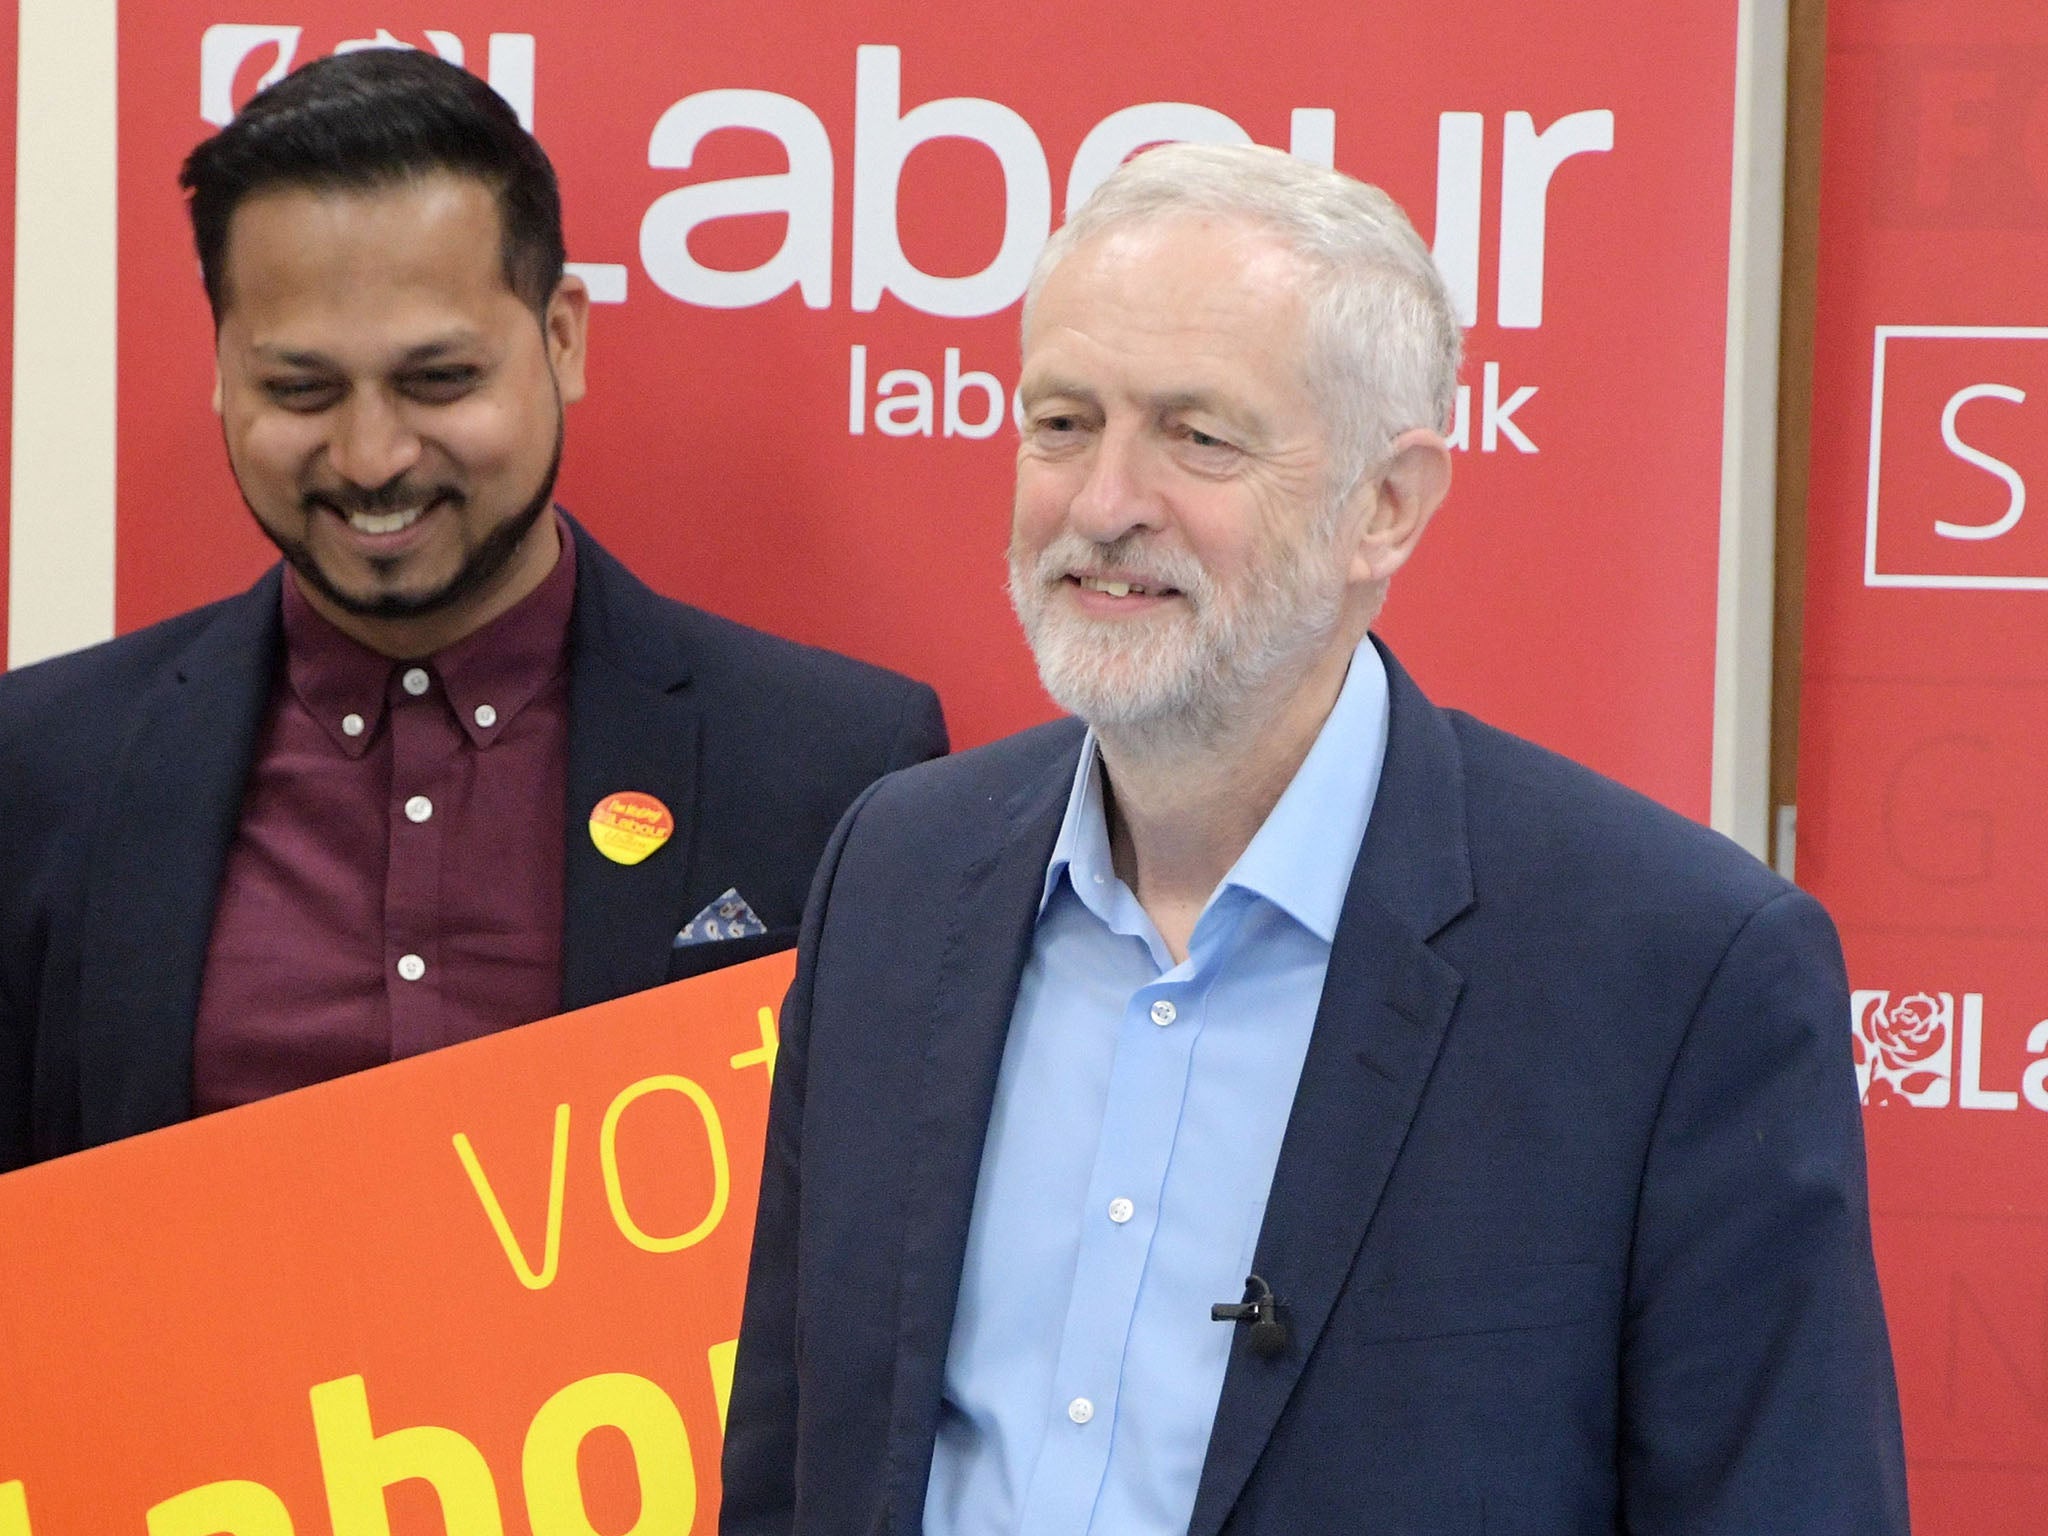 Labour is not ready for this election and needs a game-changing policy